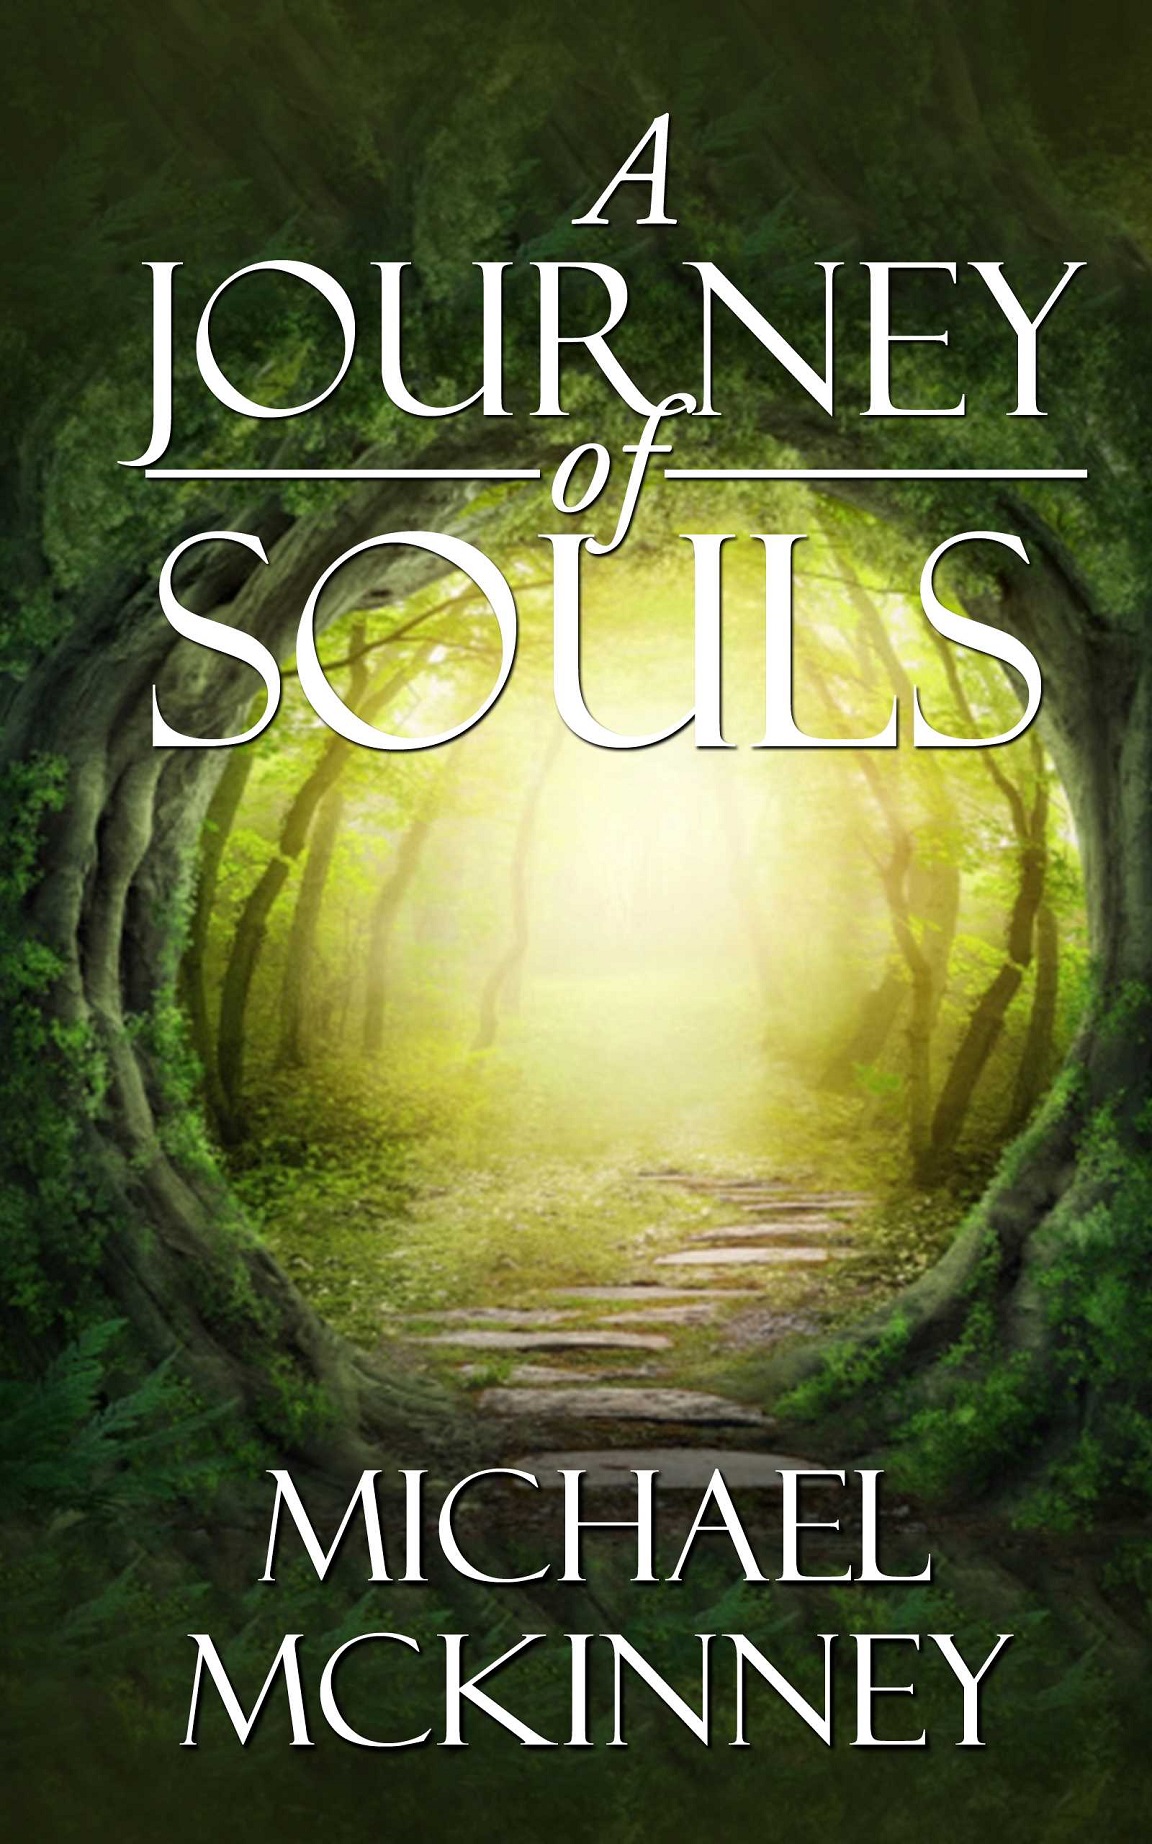 FREE: A Journey of Souls by Michael Mckinney